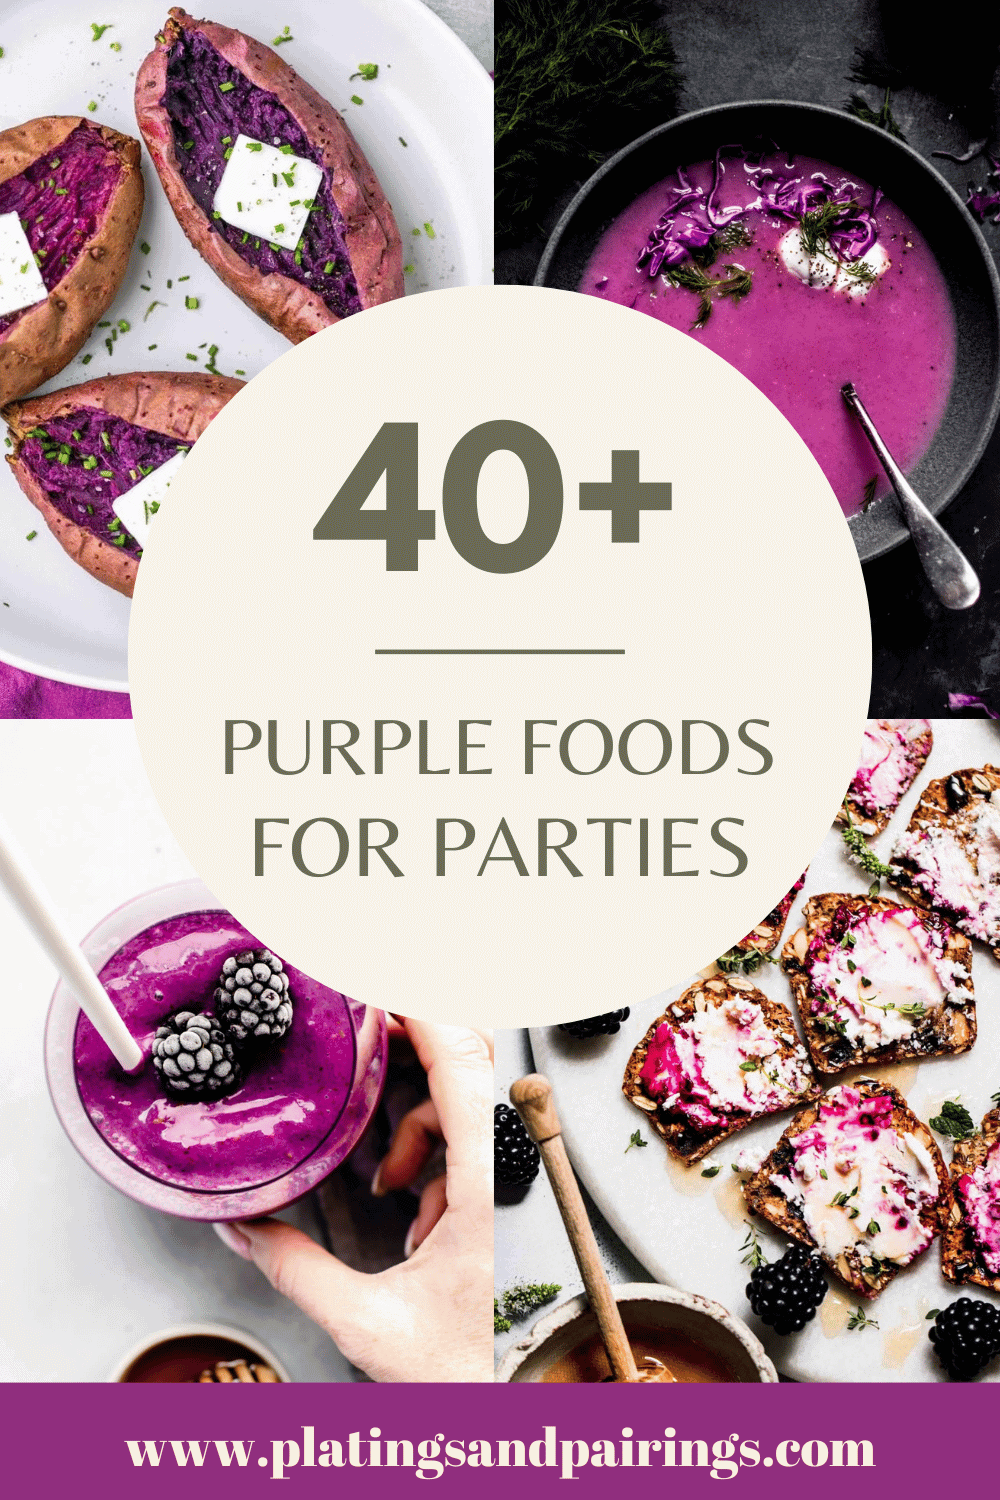 Collage of purple foods with text overlay.